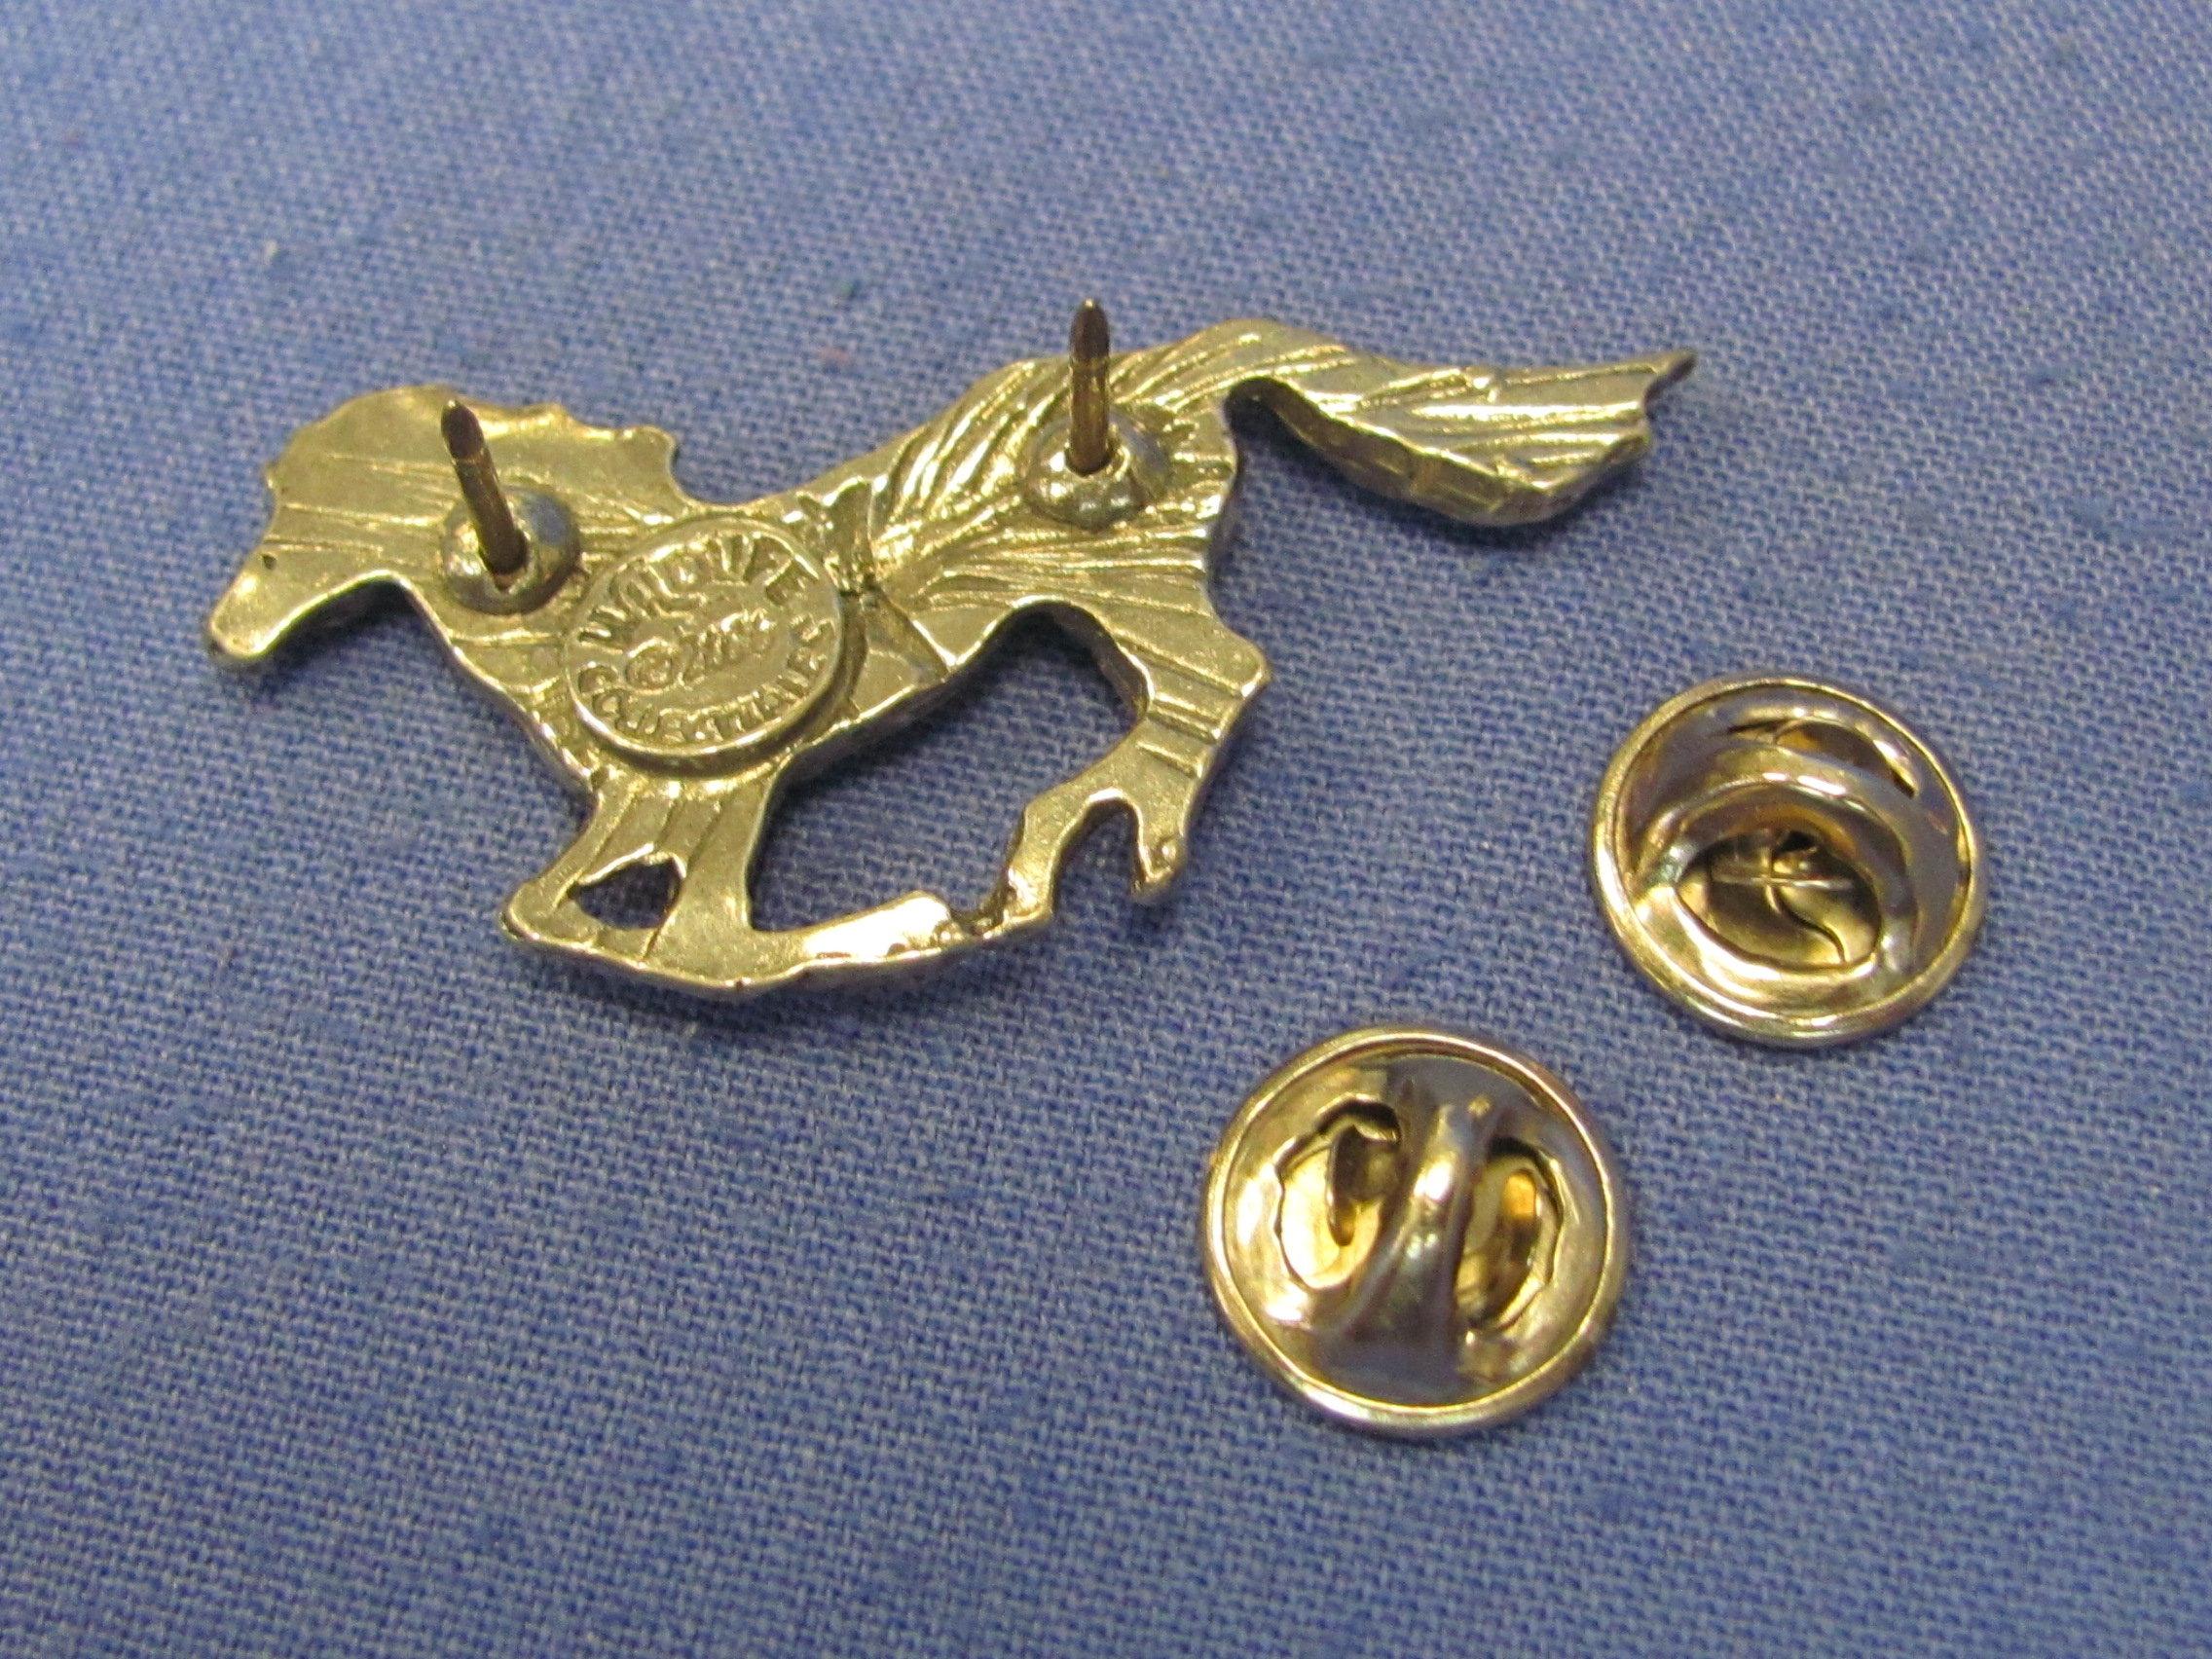 Galloping Horse Tack Pin – Silvertone Metal, maybe Pewter – by Wildlife Collections – 1 7/8” wide